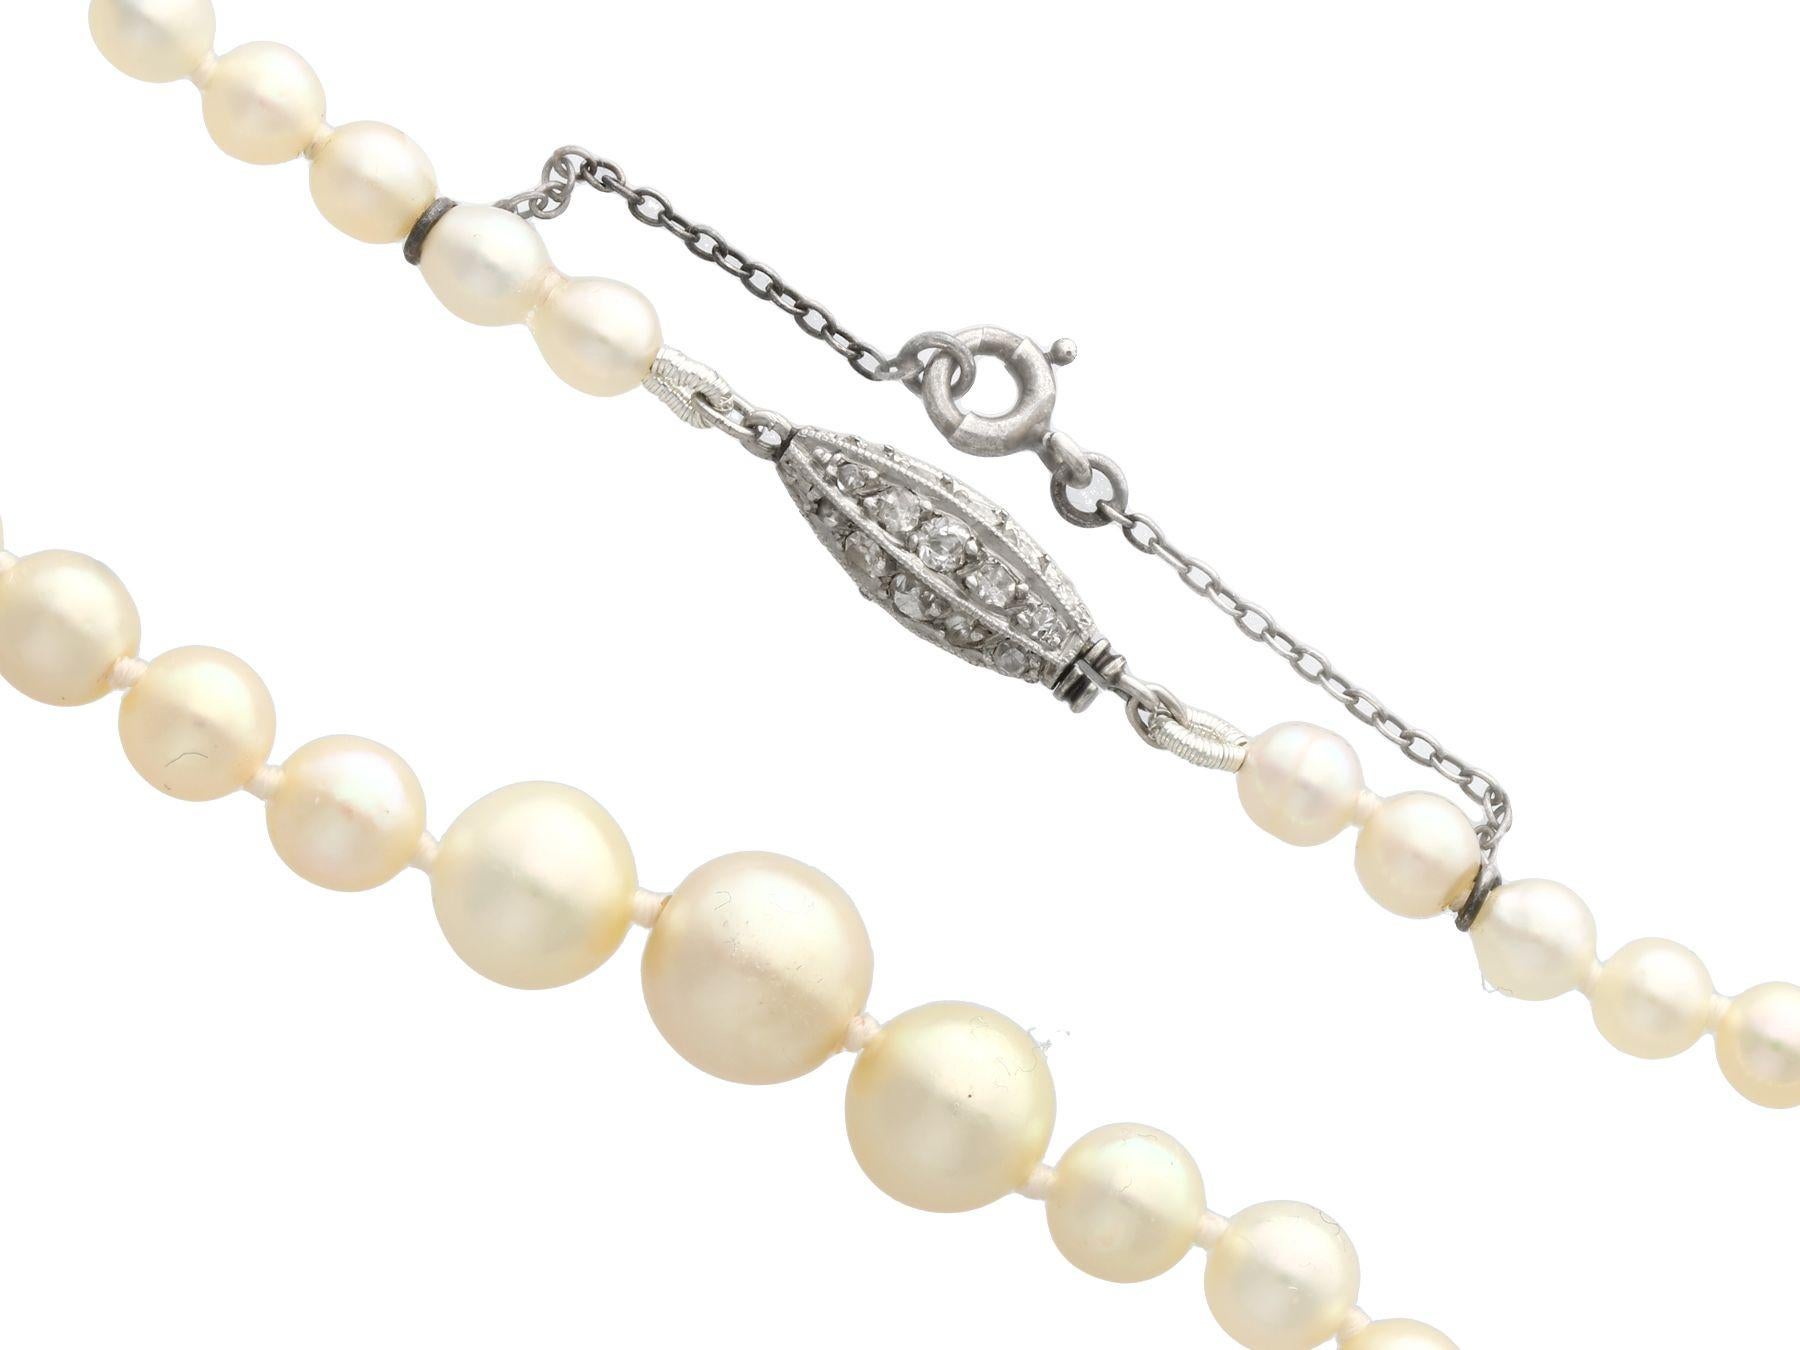 1930s pearl necklace